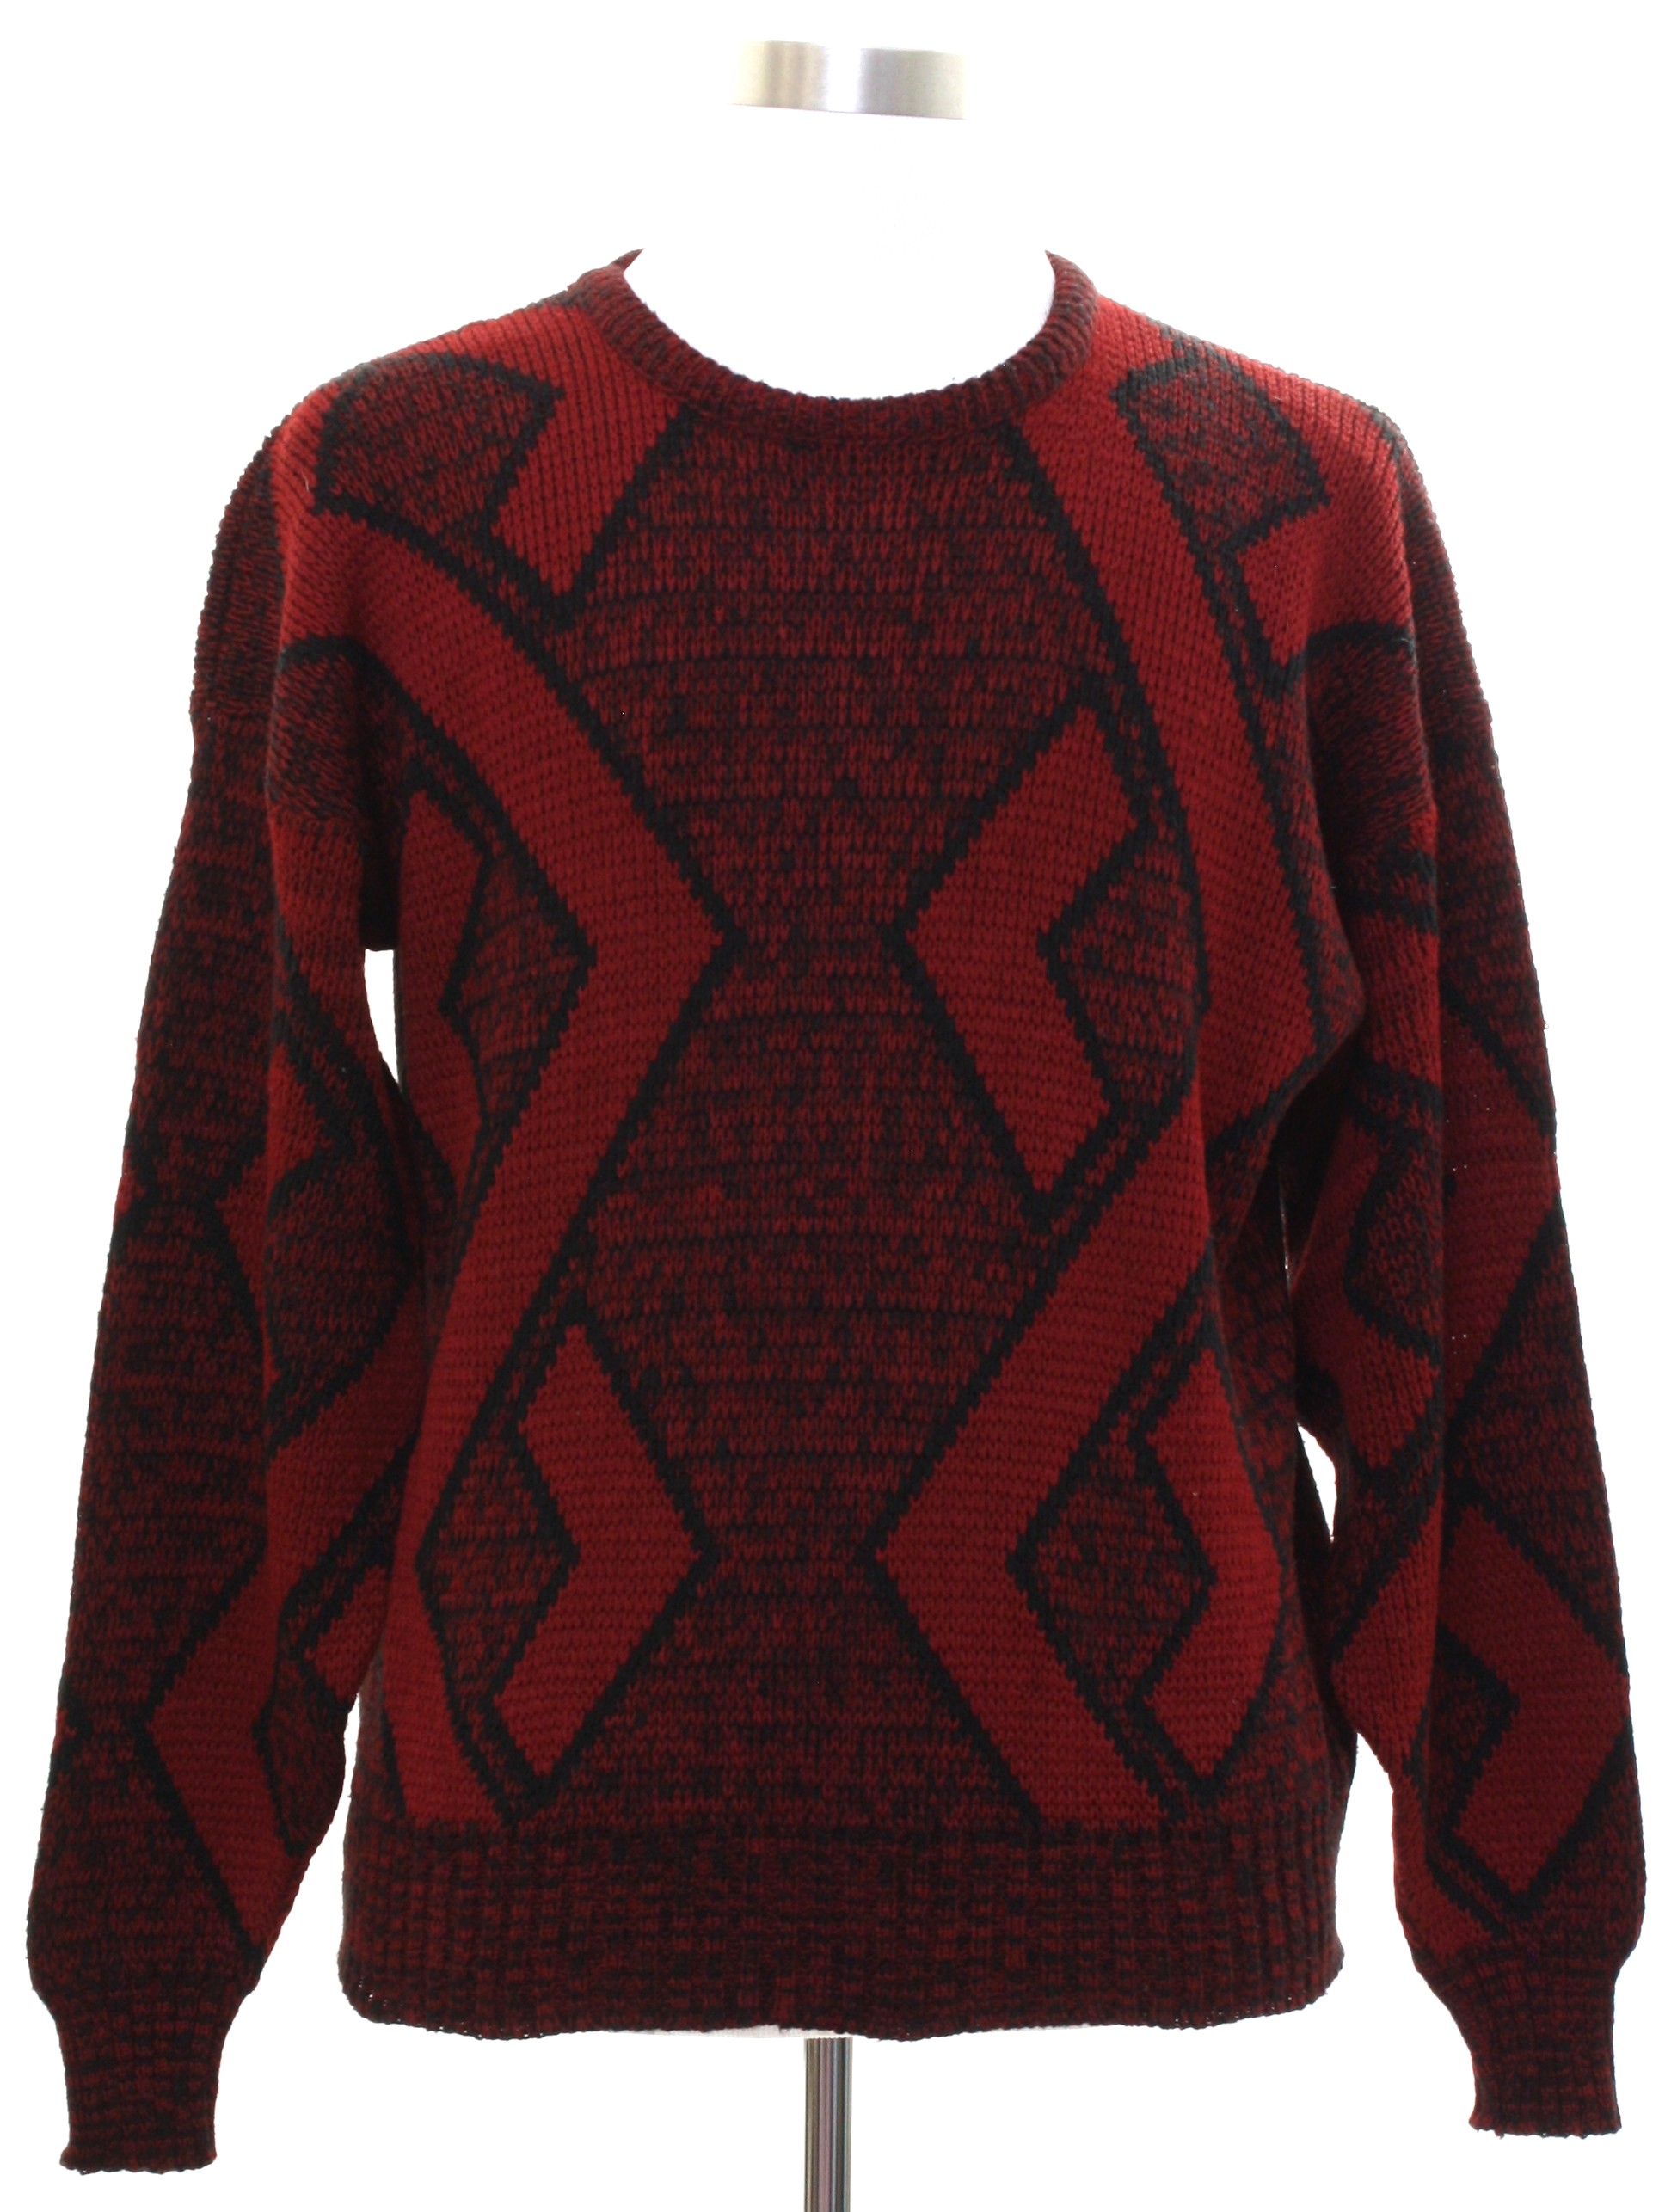 Retro Eighties Sweater: Early 80s -Edison- Mens cranberry red and black ...